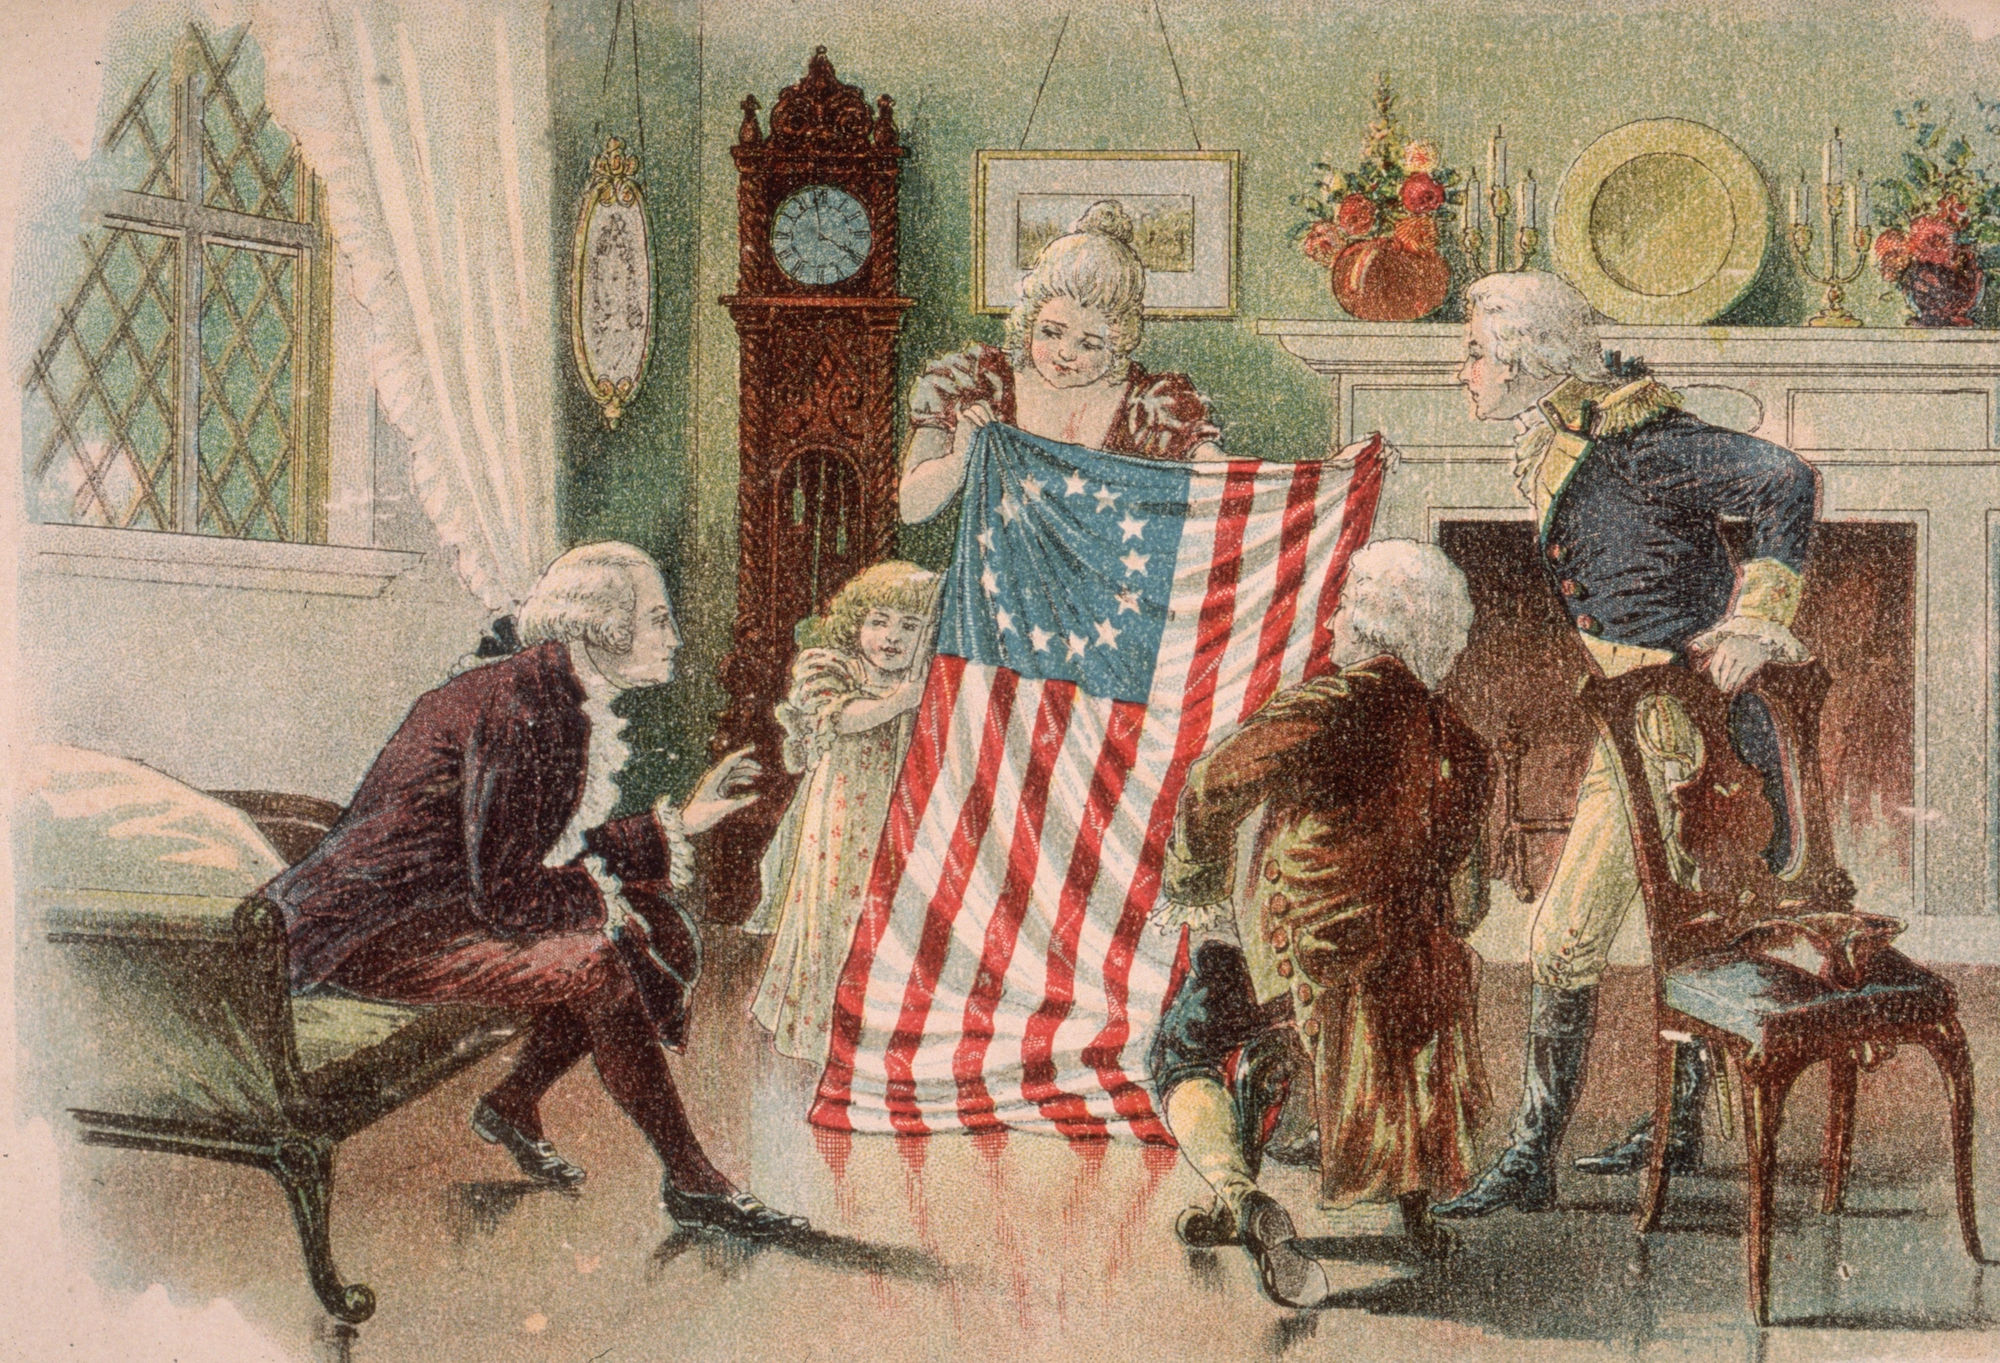 Telling the Forgotten Story of George Washington—Interview With Tammy Lane